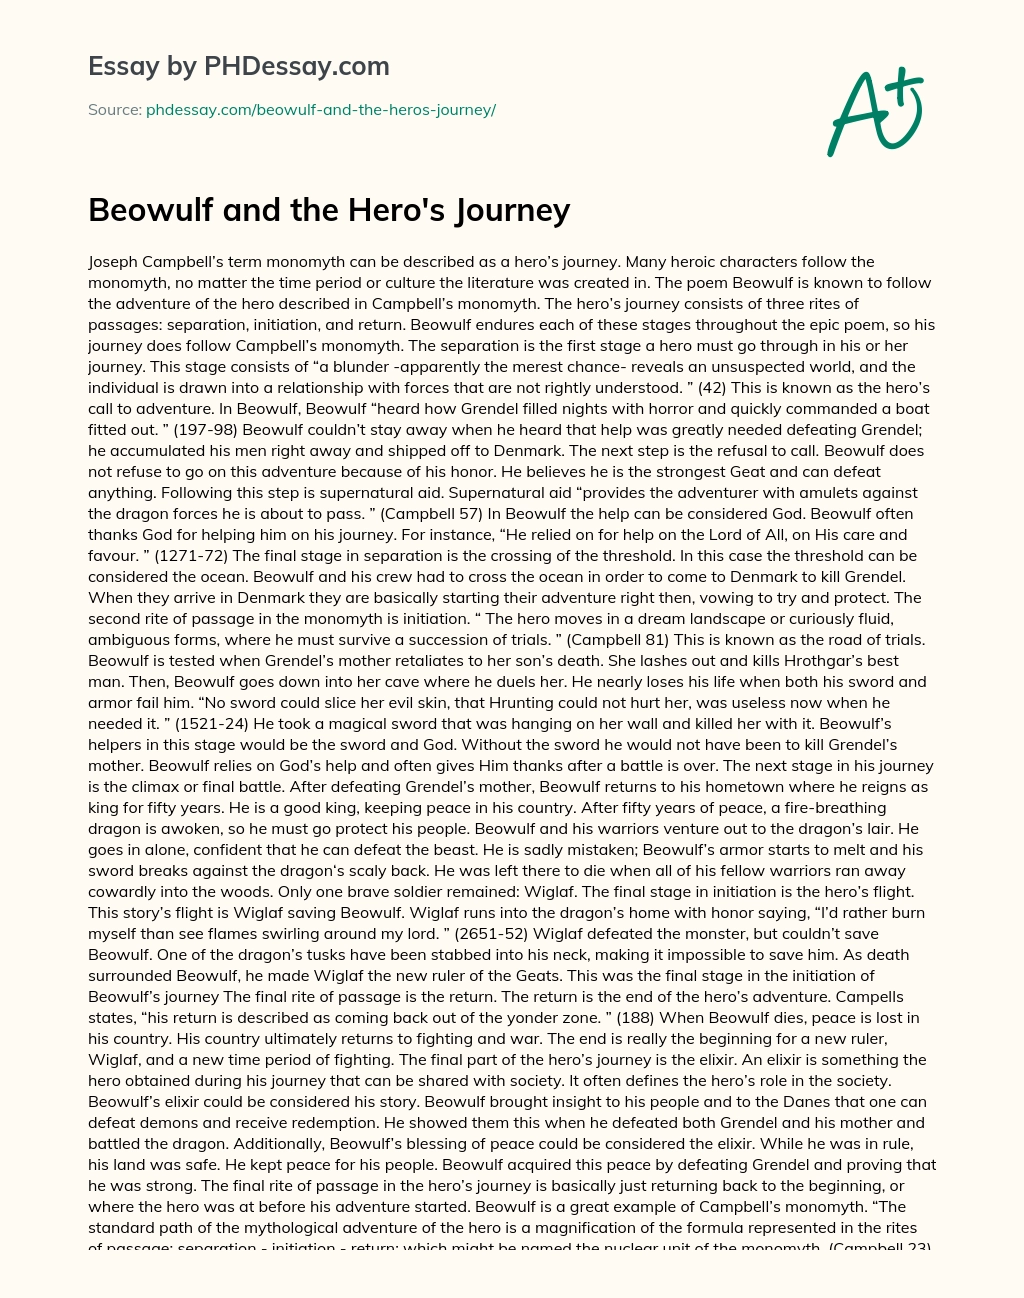 Beowulf and the Hero’s Journey essay